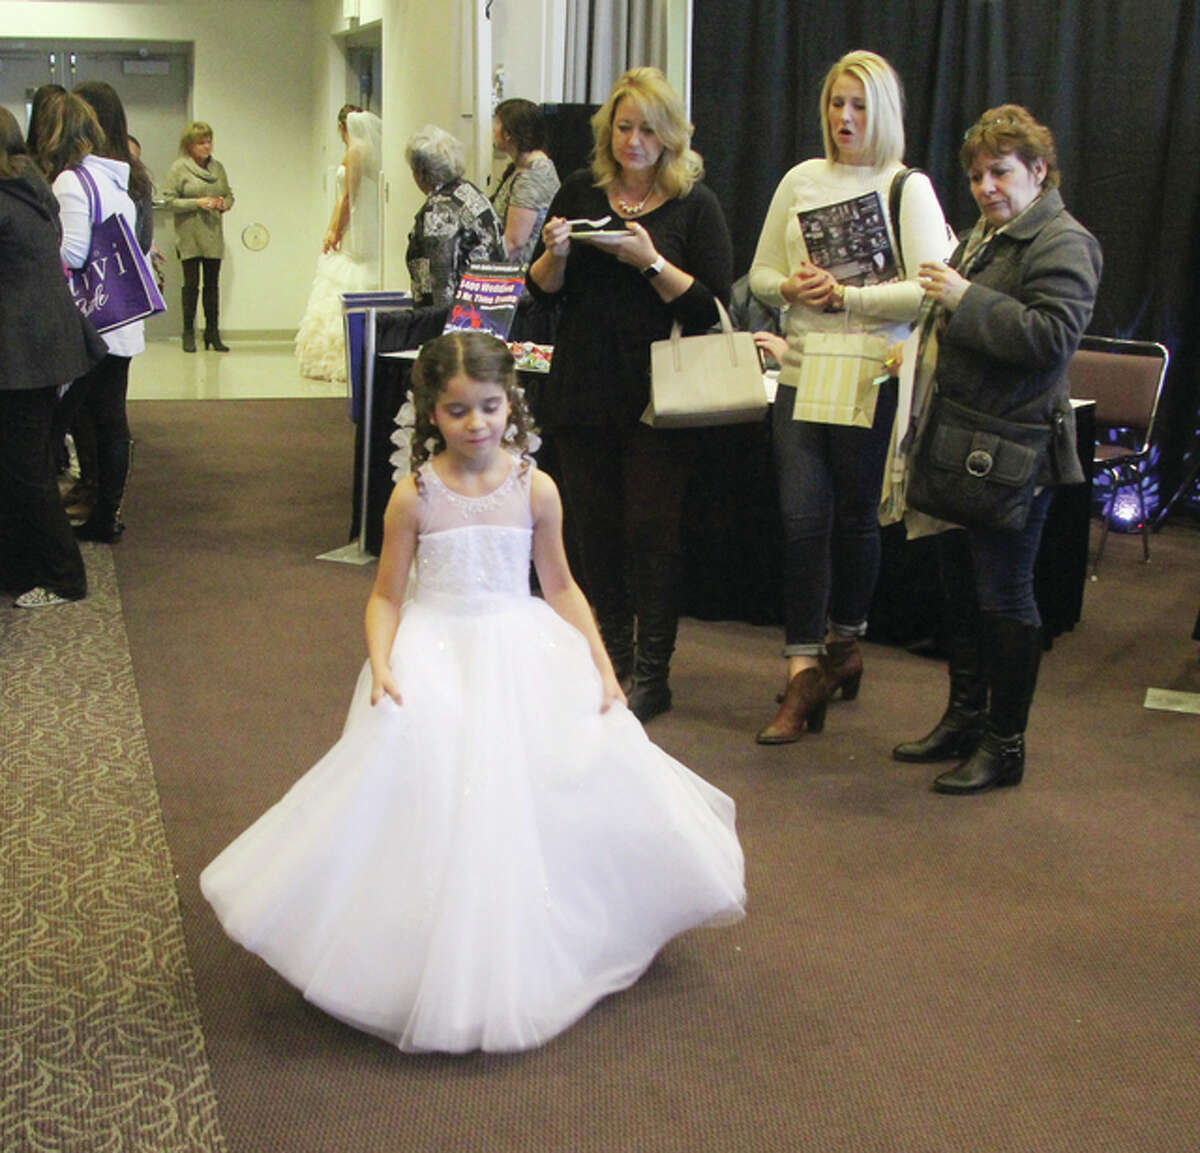 Model McKenna Fox walks through the crowds to get to the stage during one of two fashion shows at The Telegraph’s Annual Bridal Show, held Sunday at The Commons at Lewis and Clark Community College.